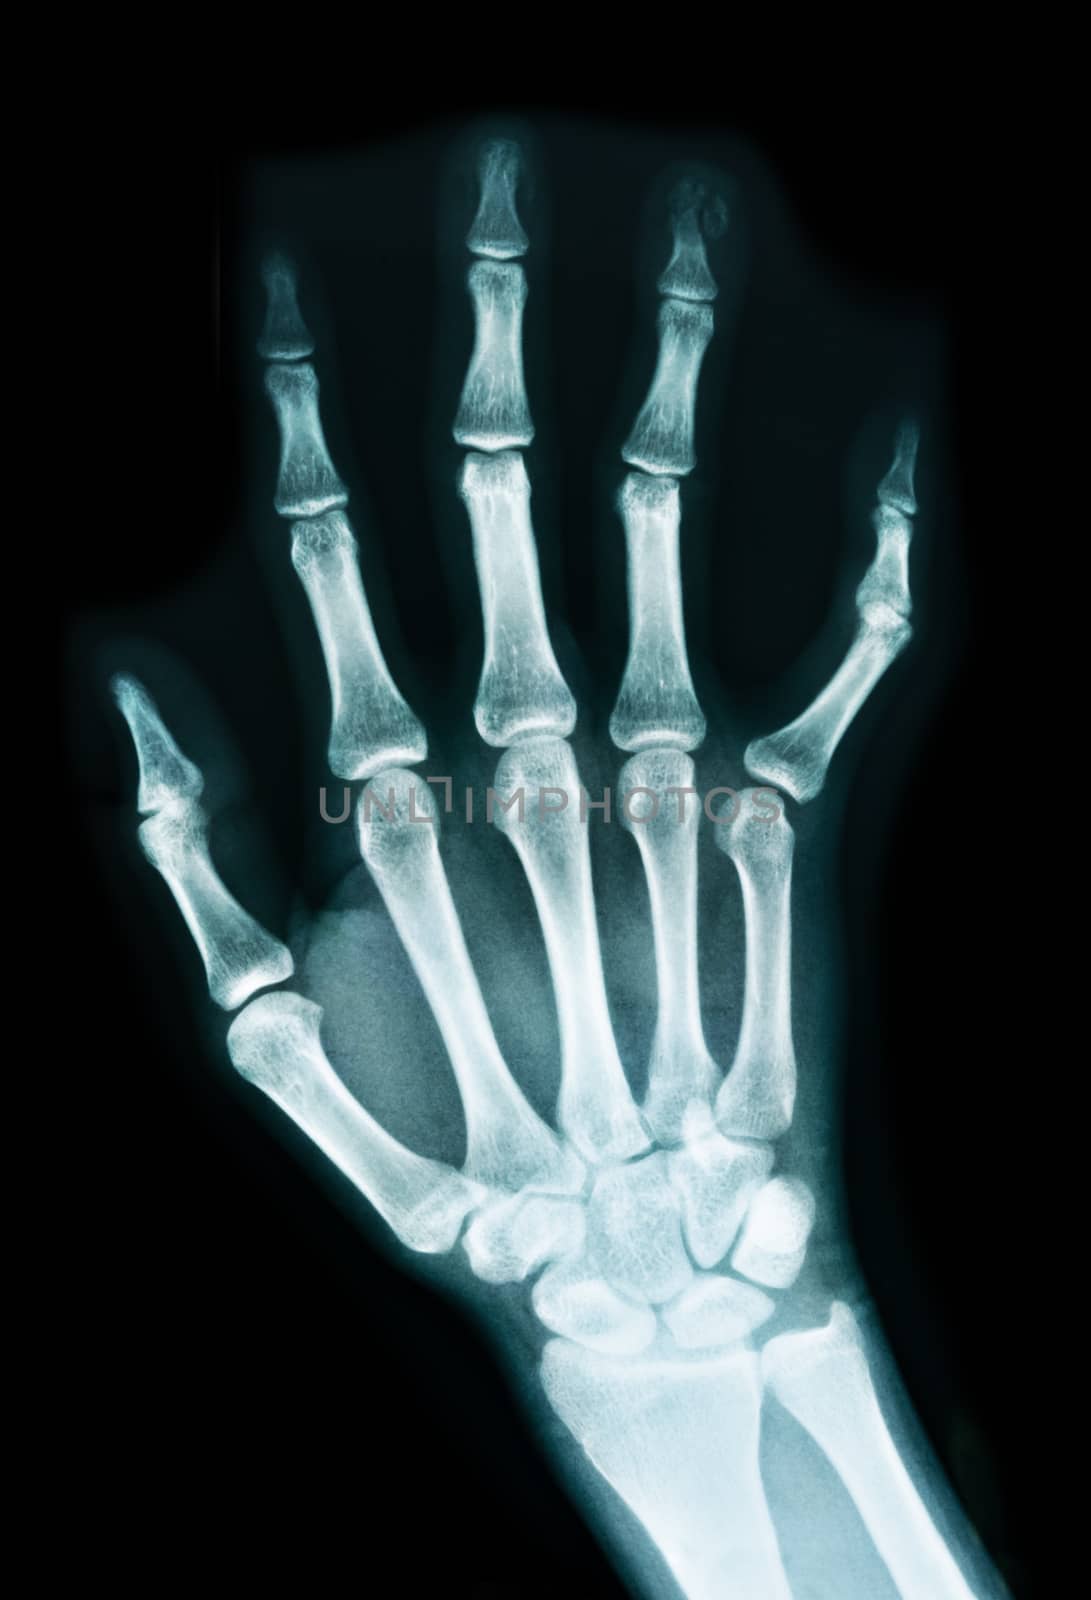 X-ray of a hand by Gamjai